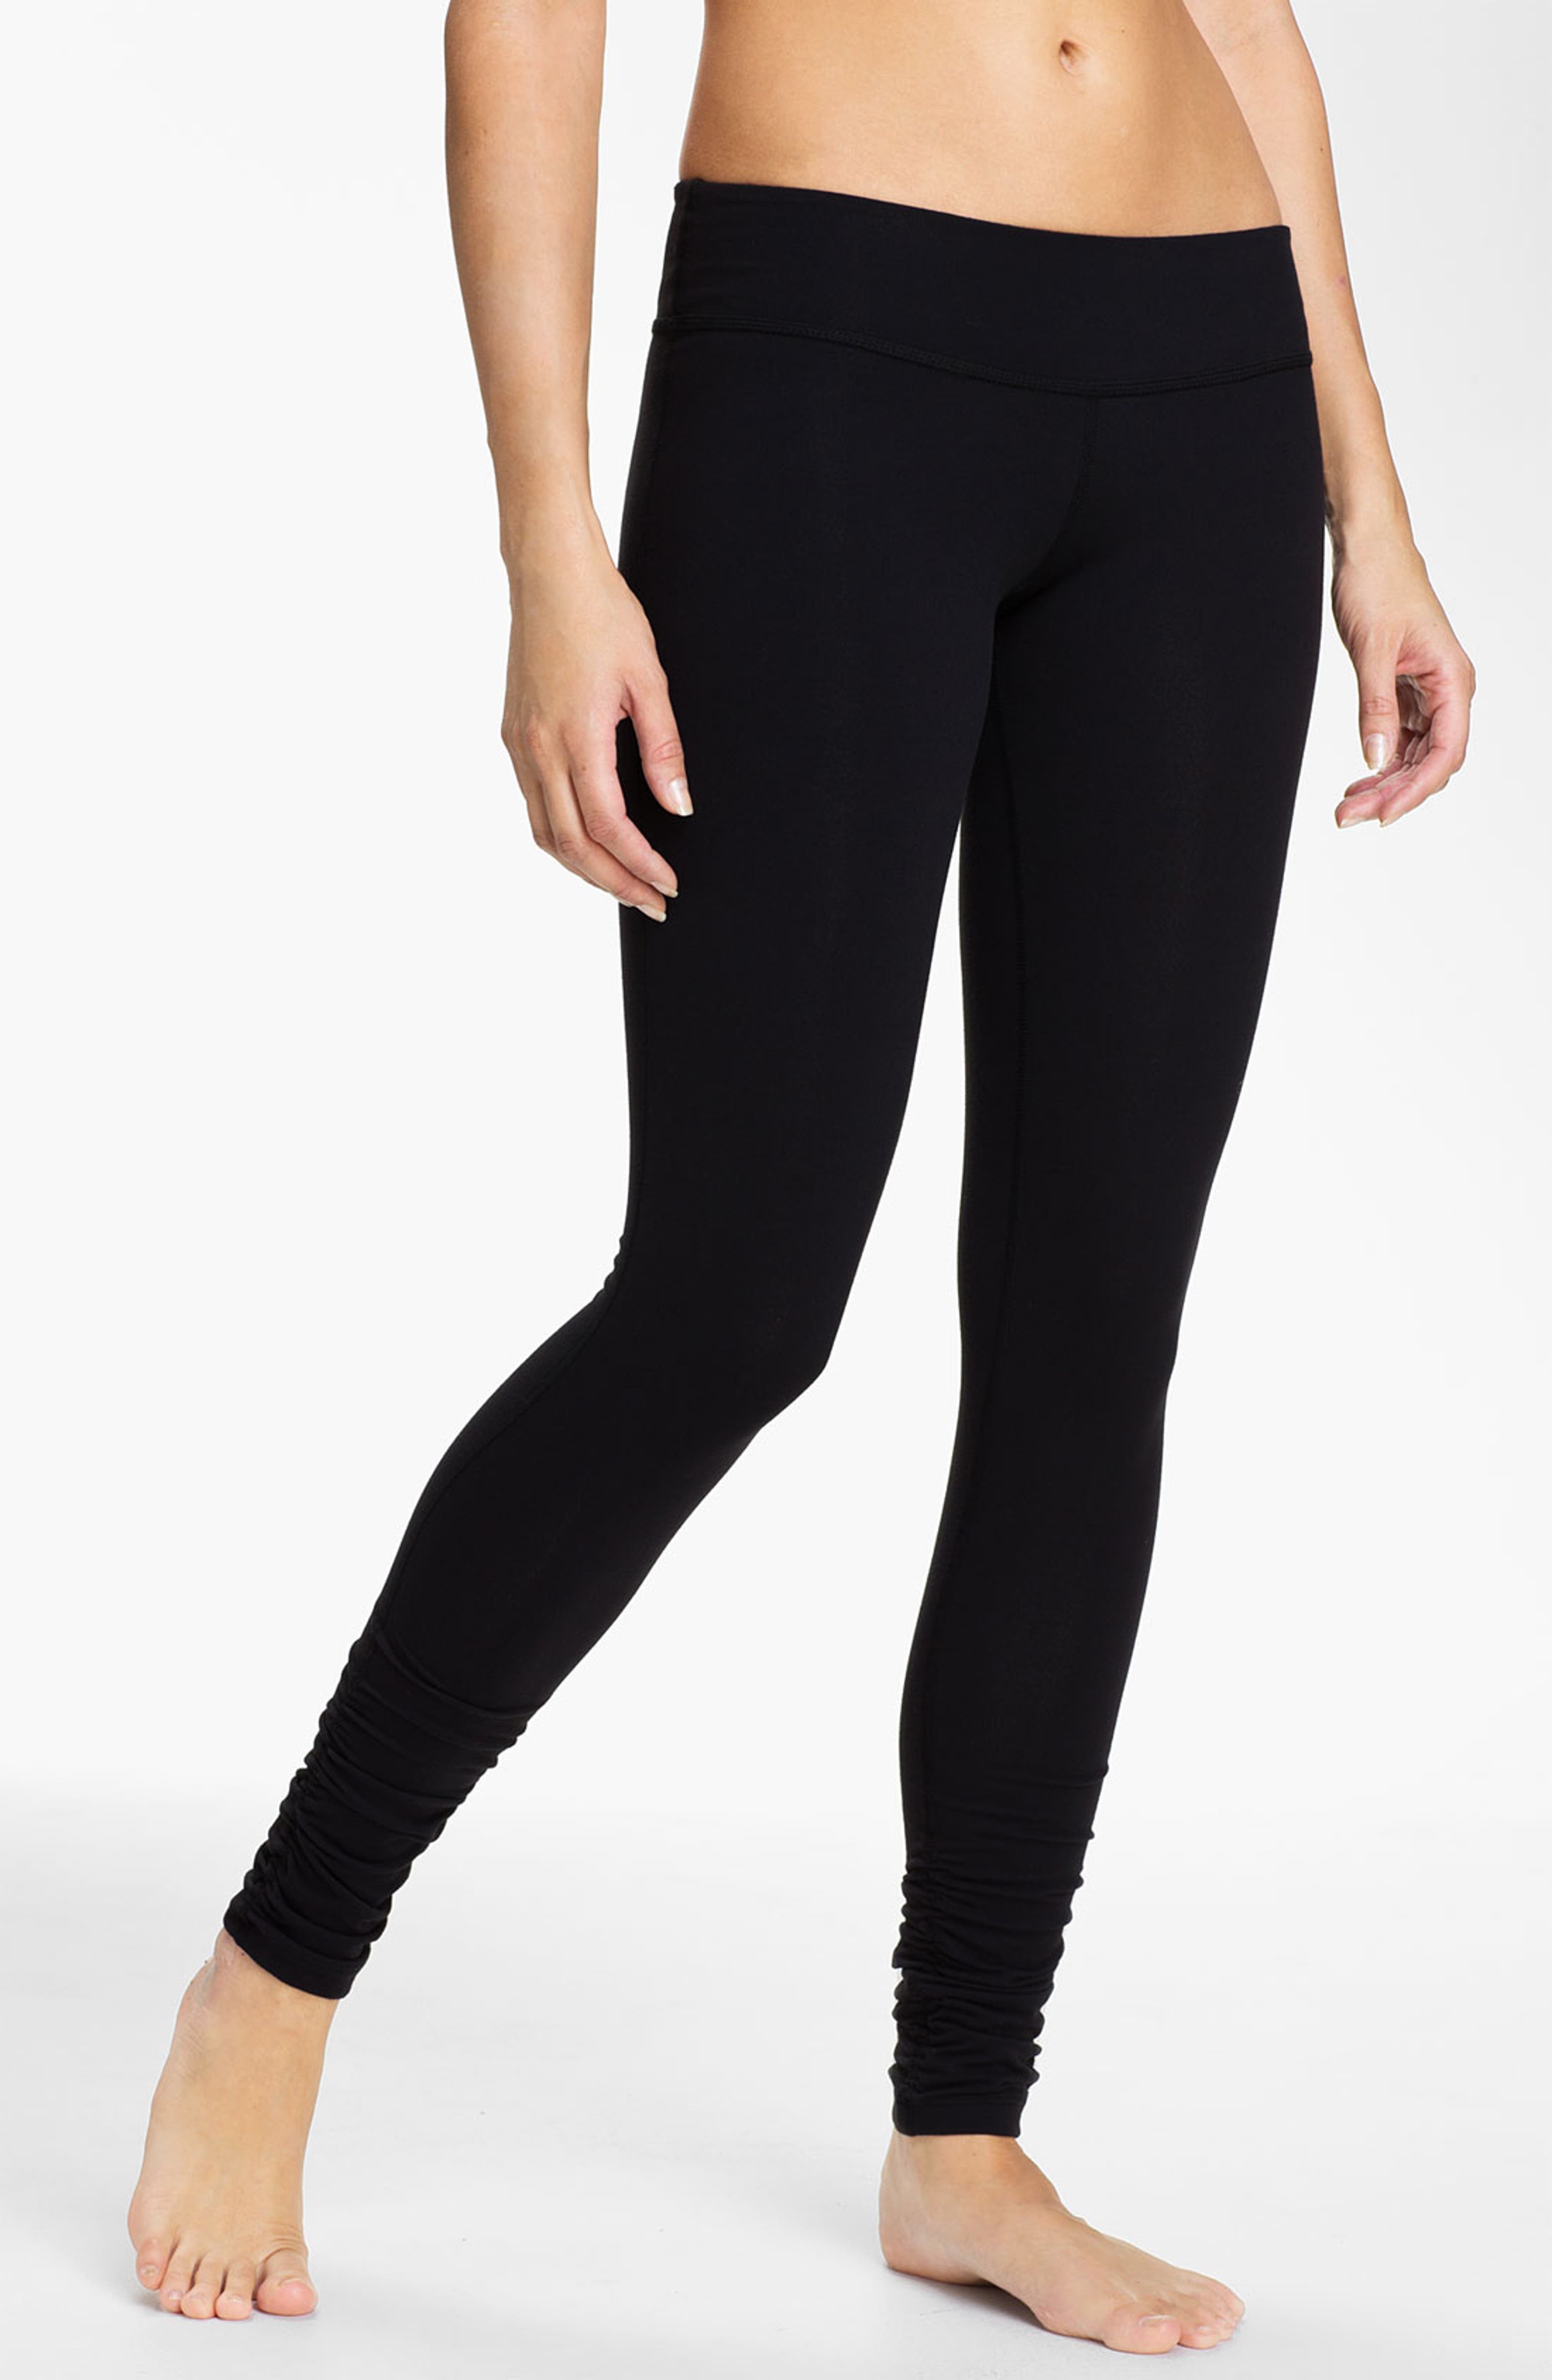 Lululemon Yoga Pants Too Sheer Pictures  International Society of  Precision Agriculture